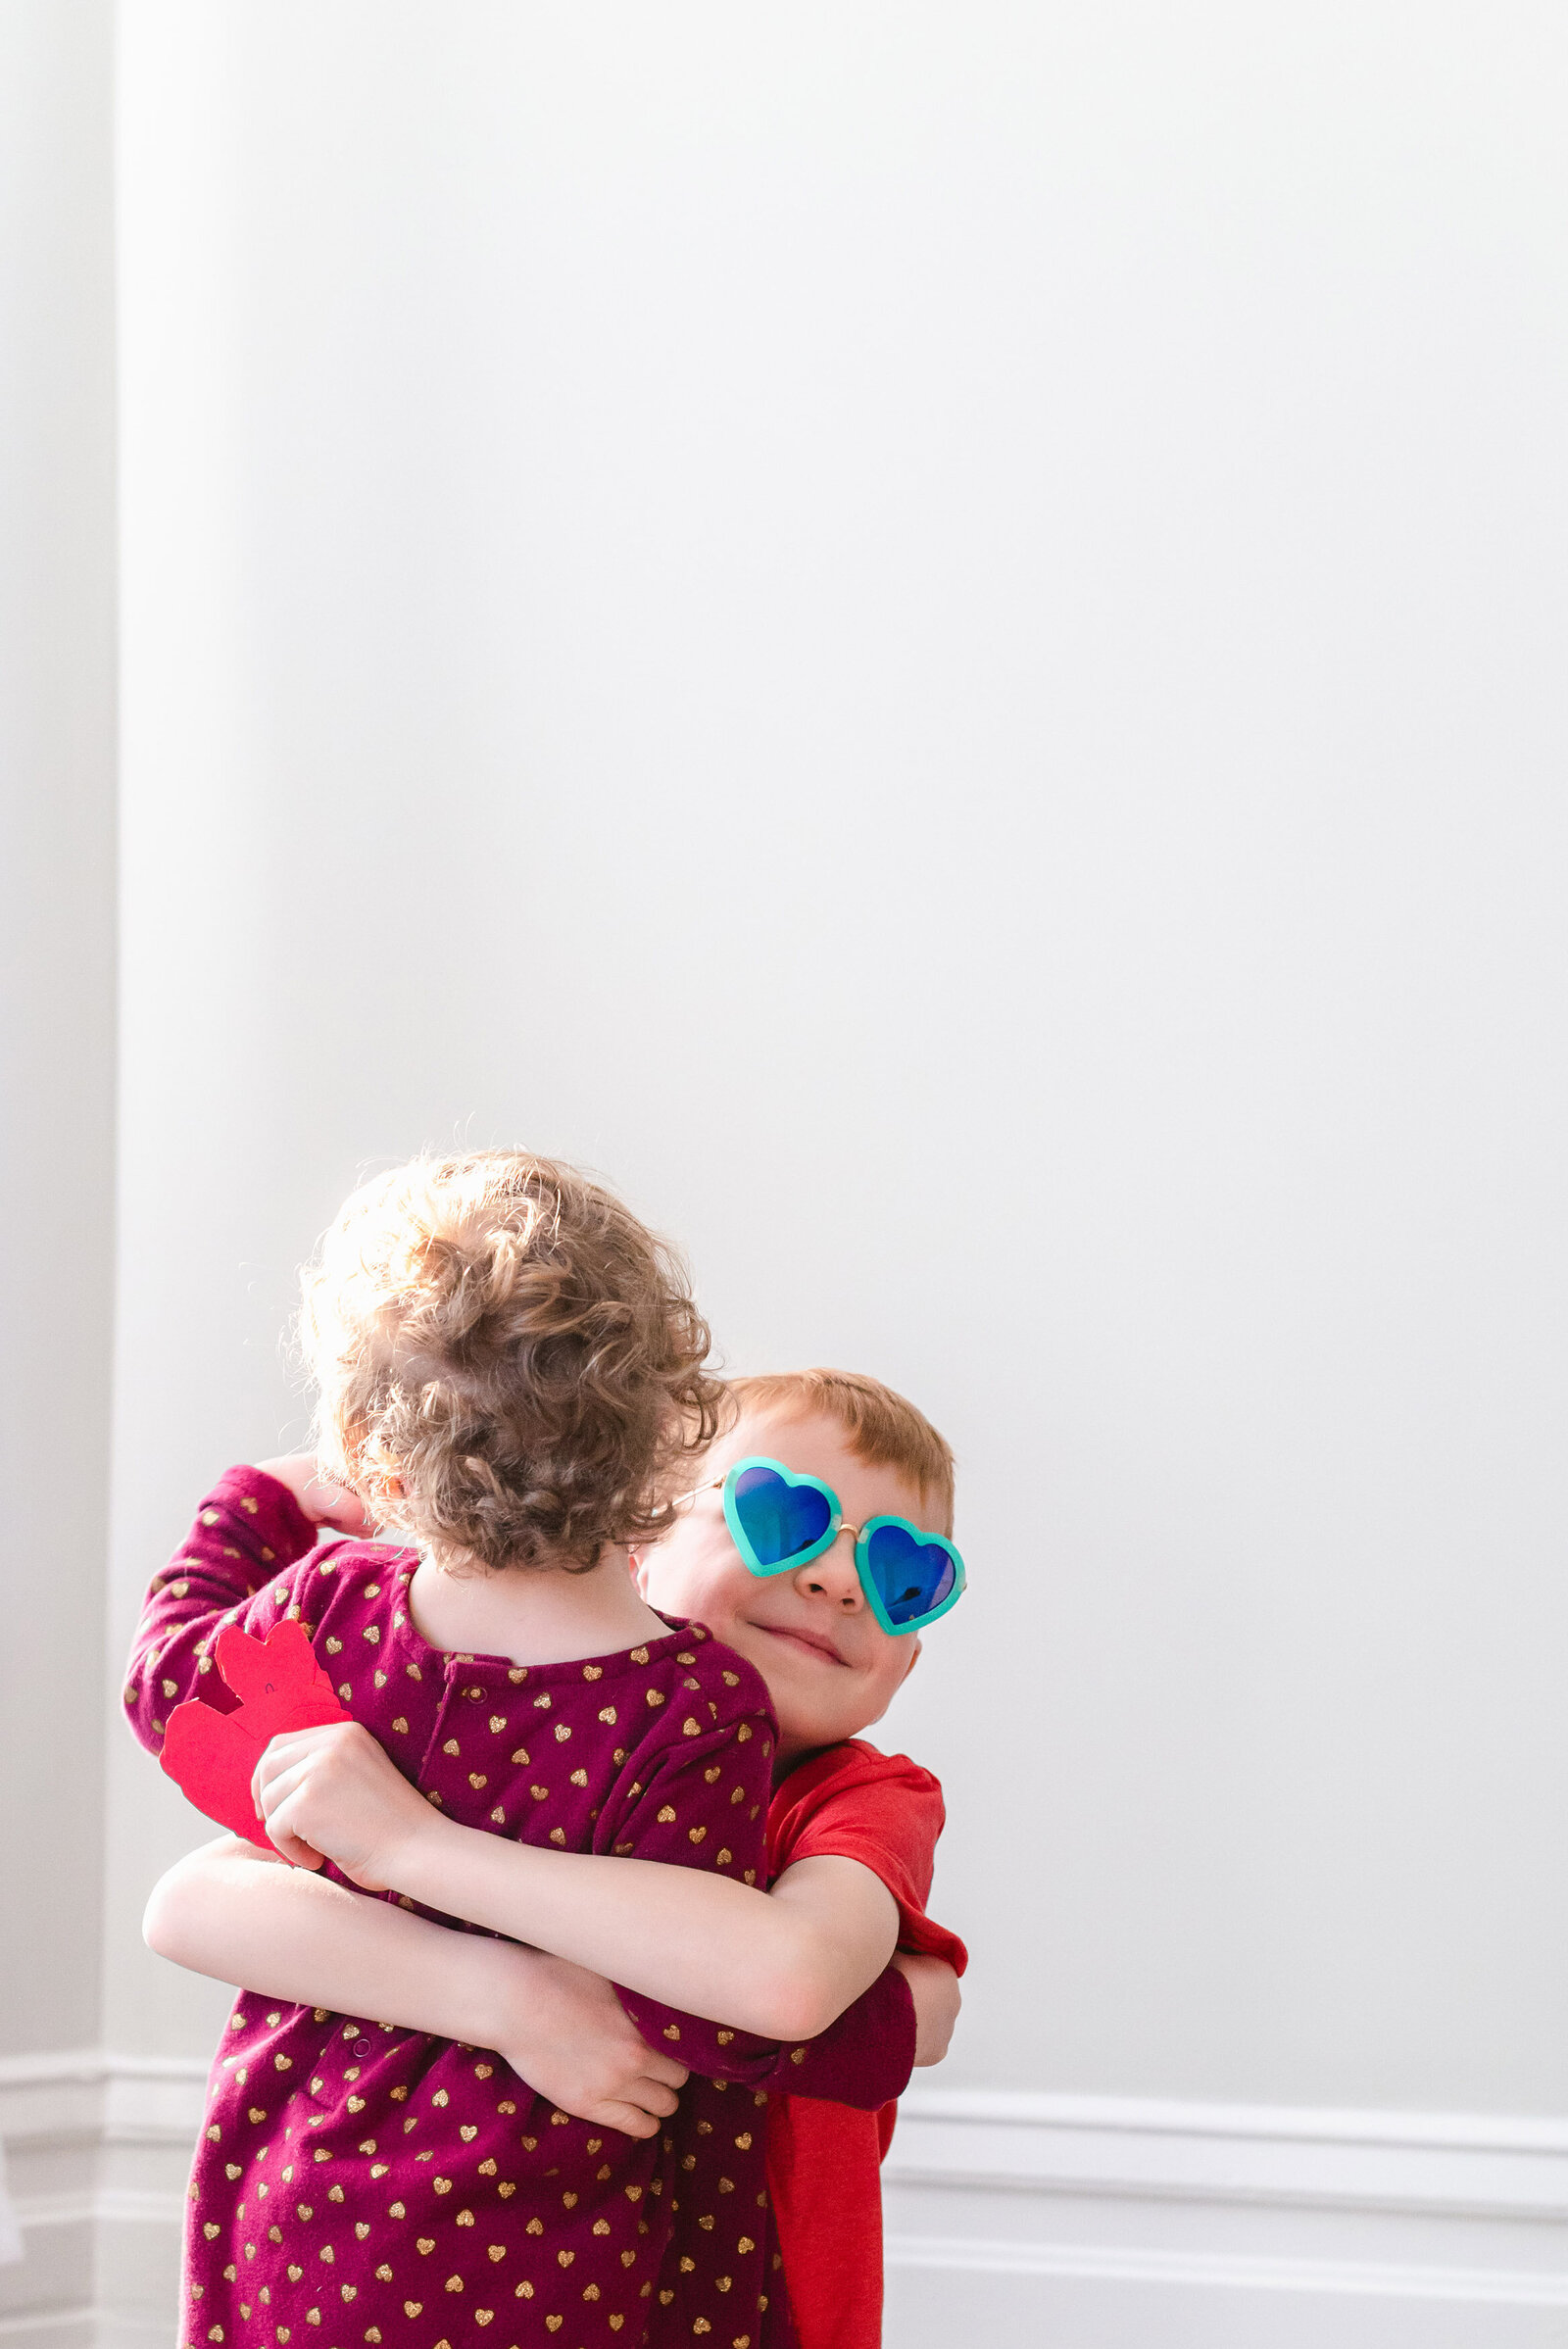 Brother wearing heart sunglasses hugging his toddler sister for valentine's day photo mini sessions